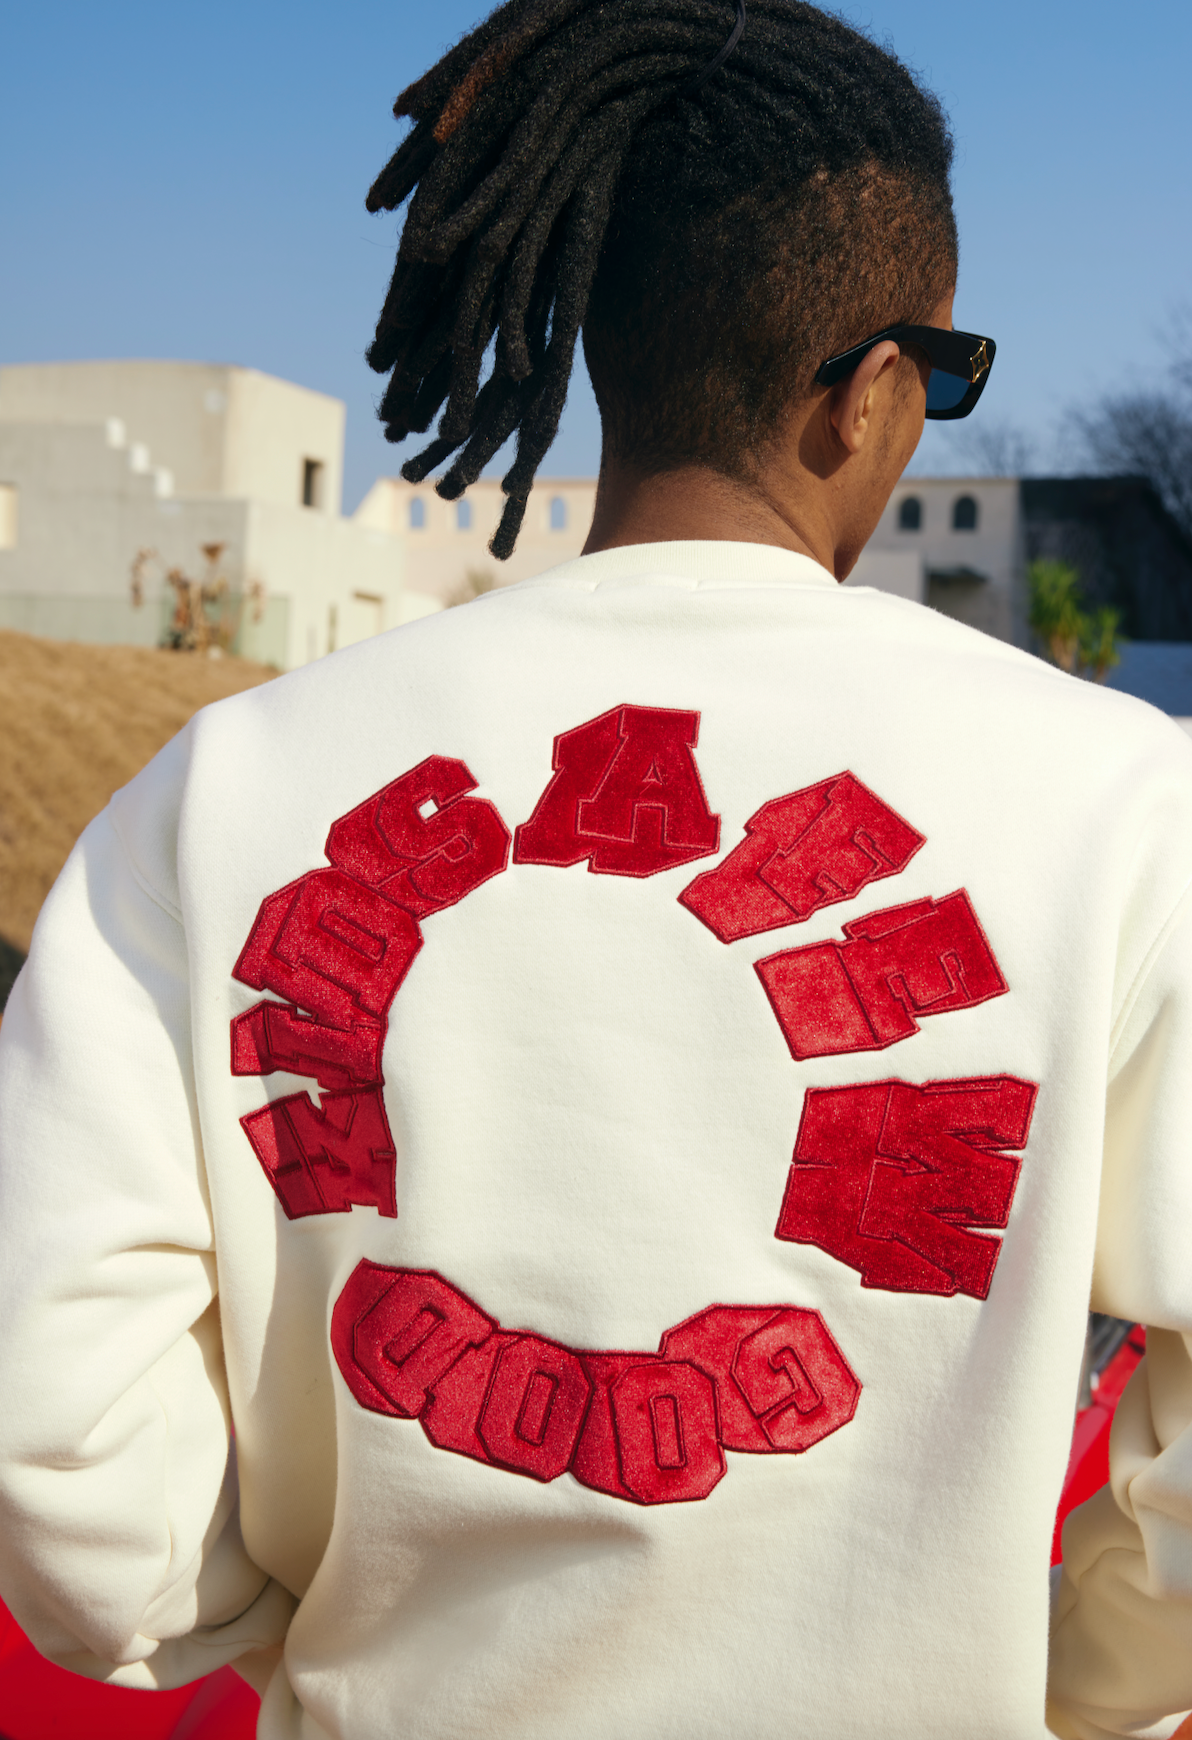 DONCARE(AFGK) "Year of the rabbit exclusive sweater"